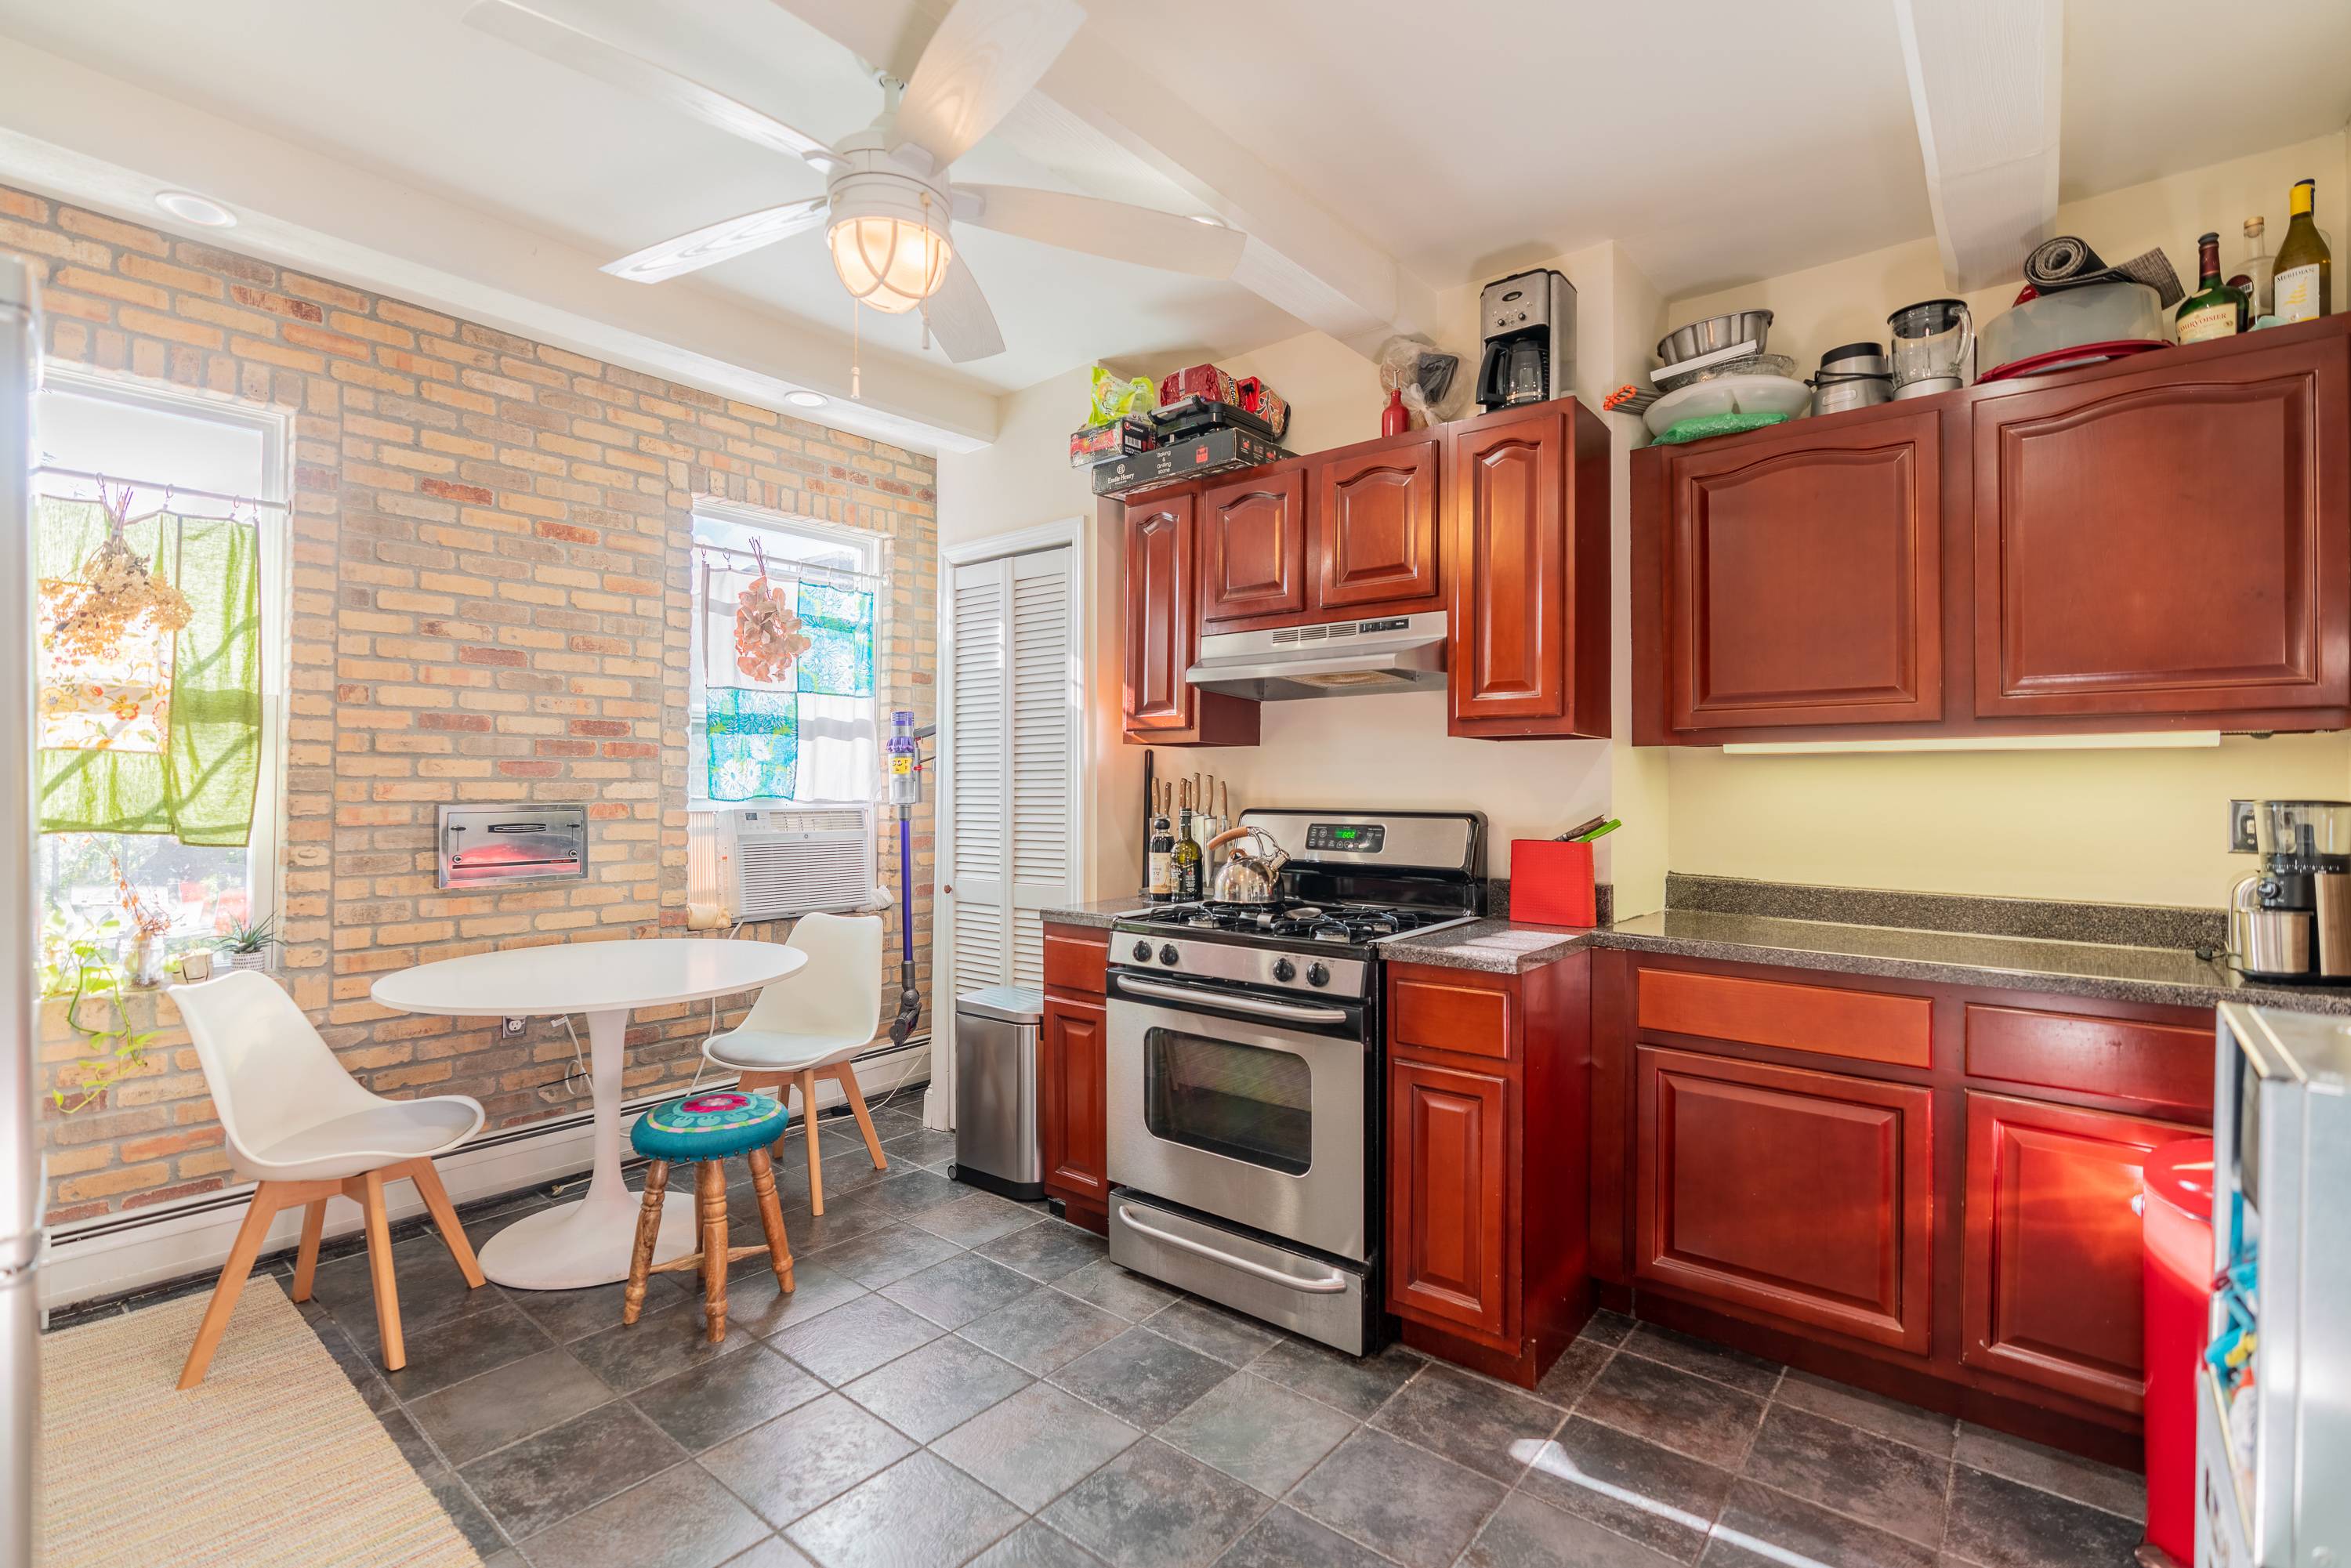 Floor-Thru Modern 1Bed/1Bath W/ Walk In Closet/Home Office Minutes from Grove Street Path Downtown Jersey City! 1 Parking Spot Included! Free Laundry and Storage On Site!